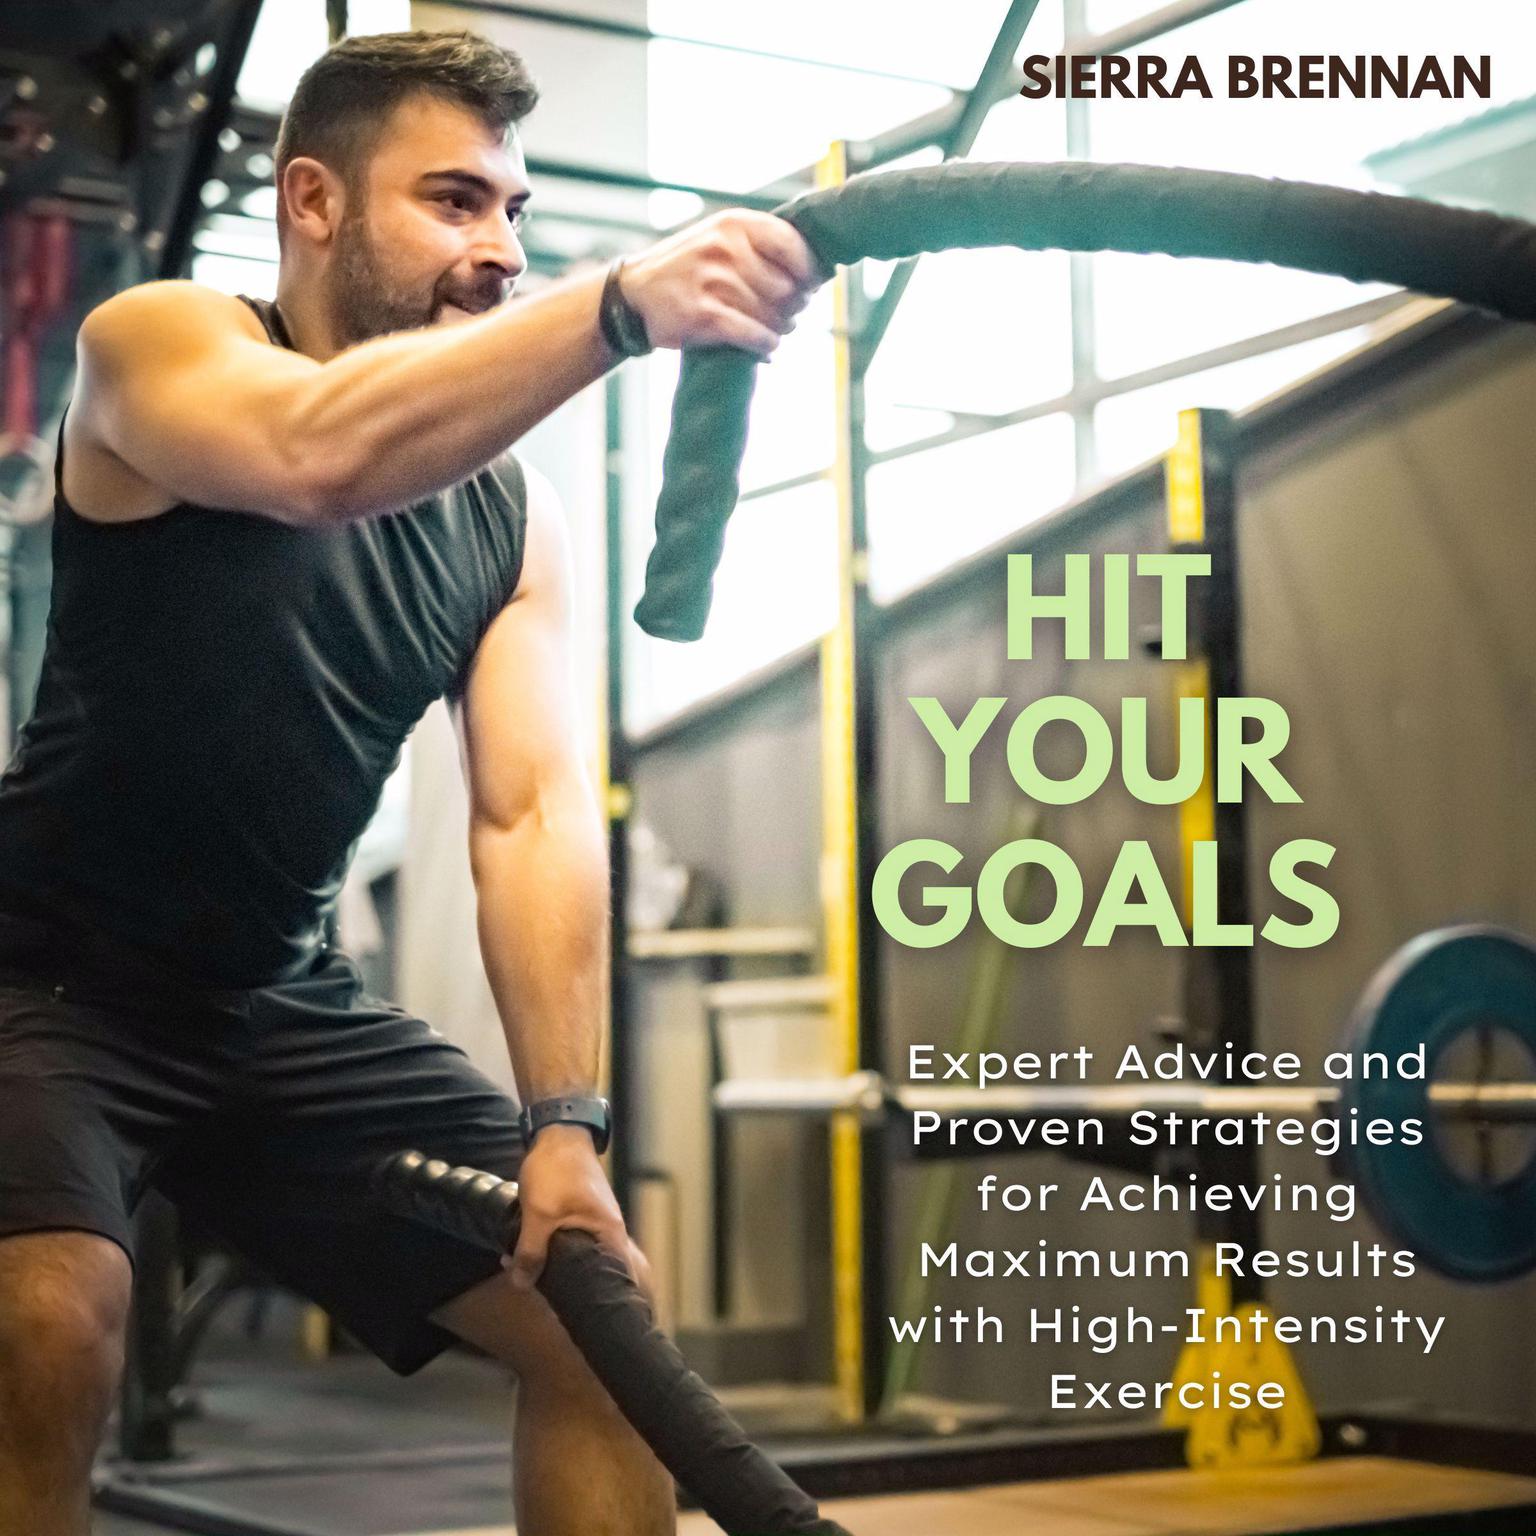 Hit Your Goals: Expert Advice and Proven Strategies for Achieving Maximum Results with High-Intensity Exercise Audiobook, by Sierra Brennan